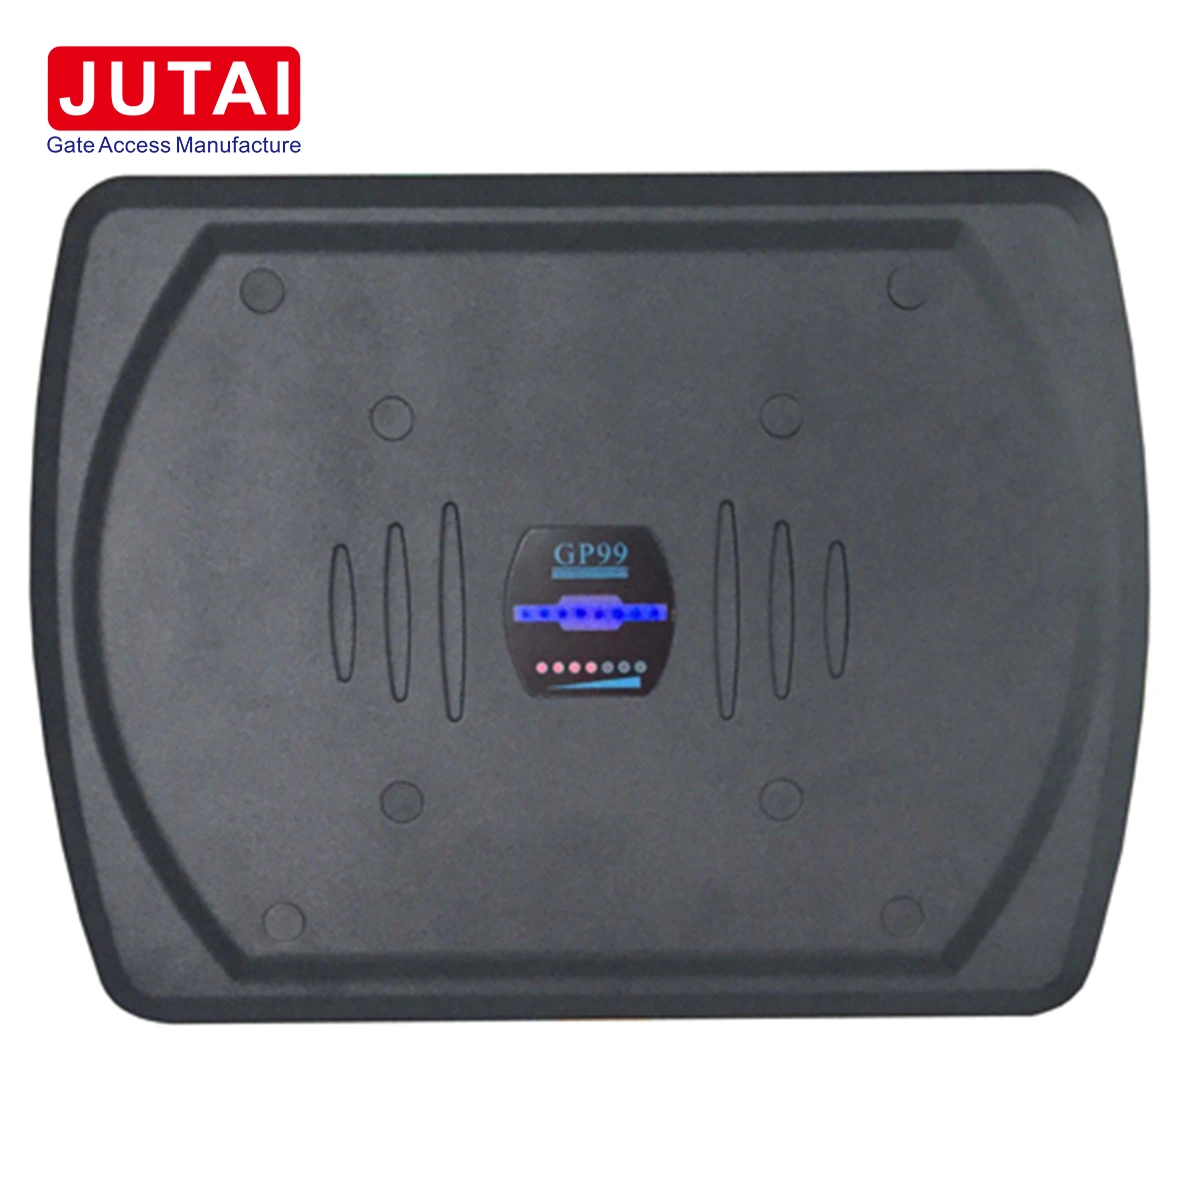 Waterproof Contactless Jutai Proximity Card Reader Gp99 Used in Access Control System